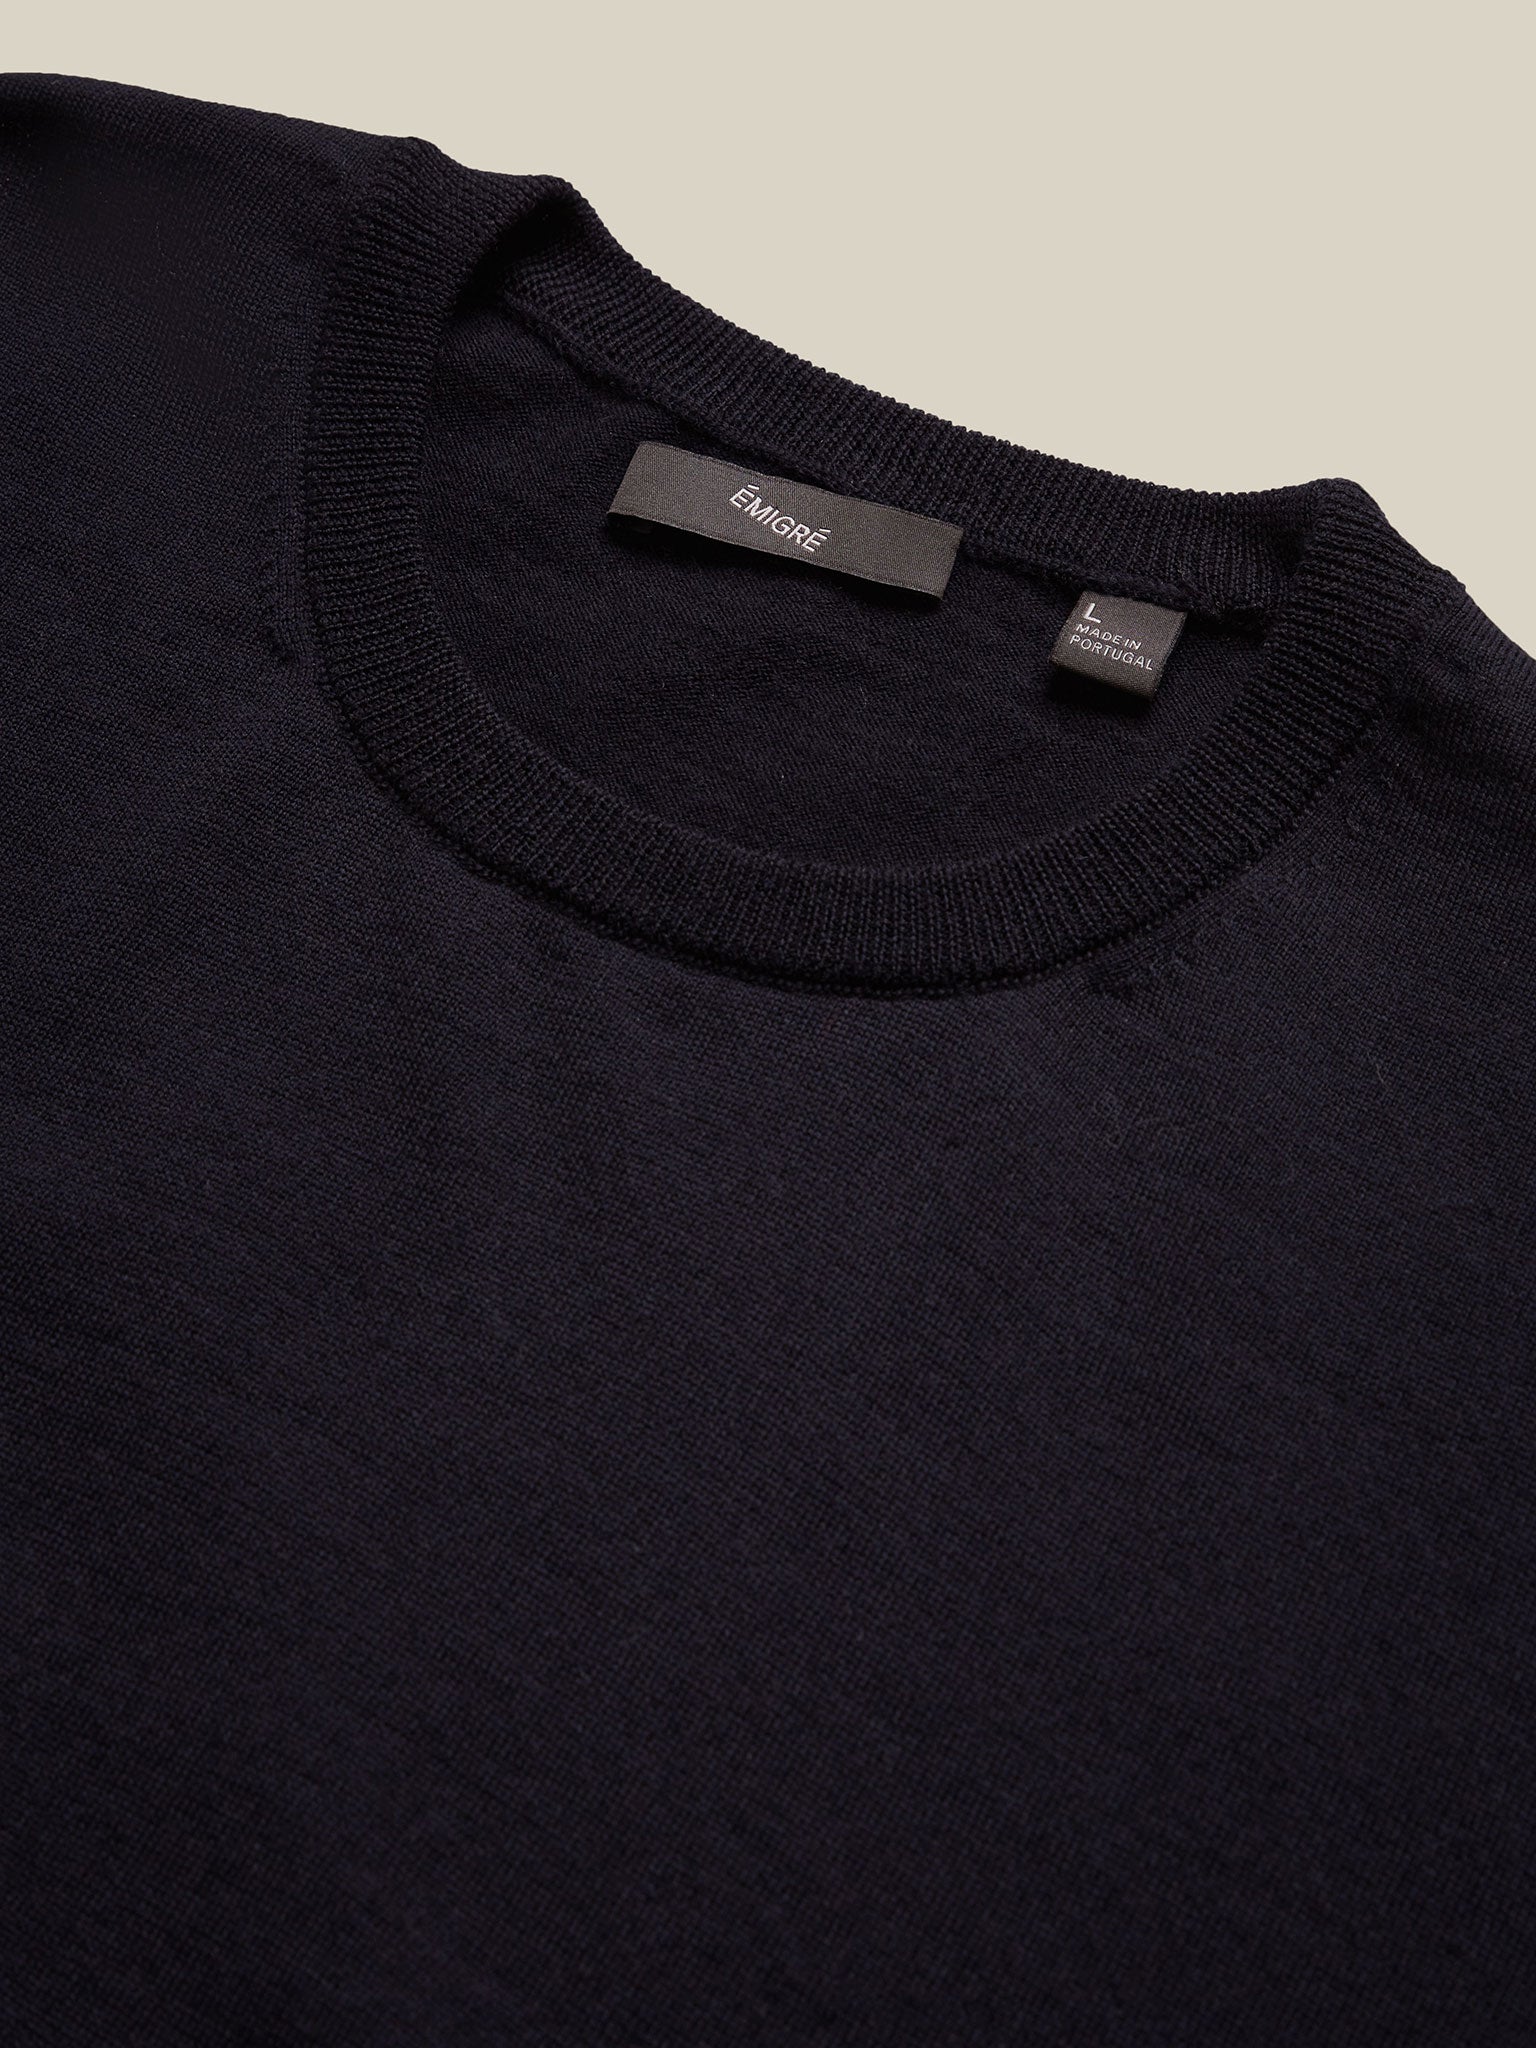 blue merino jumpers offers both comfort and style. Shop online now for a timeless look.